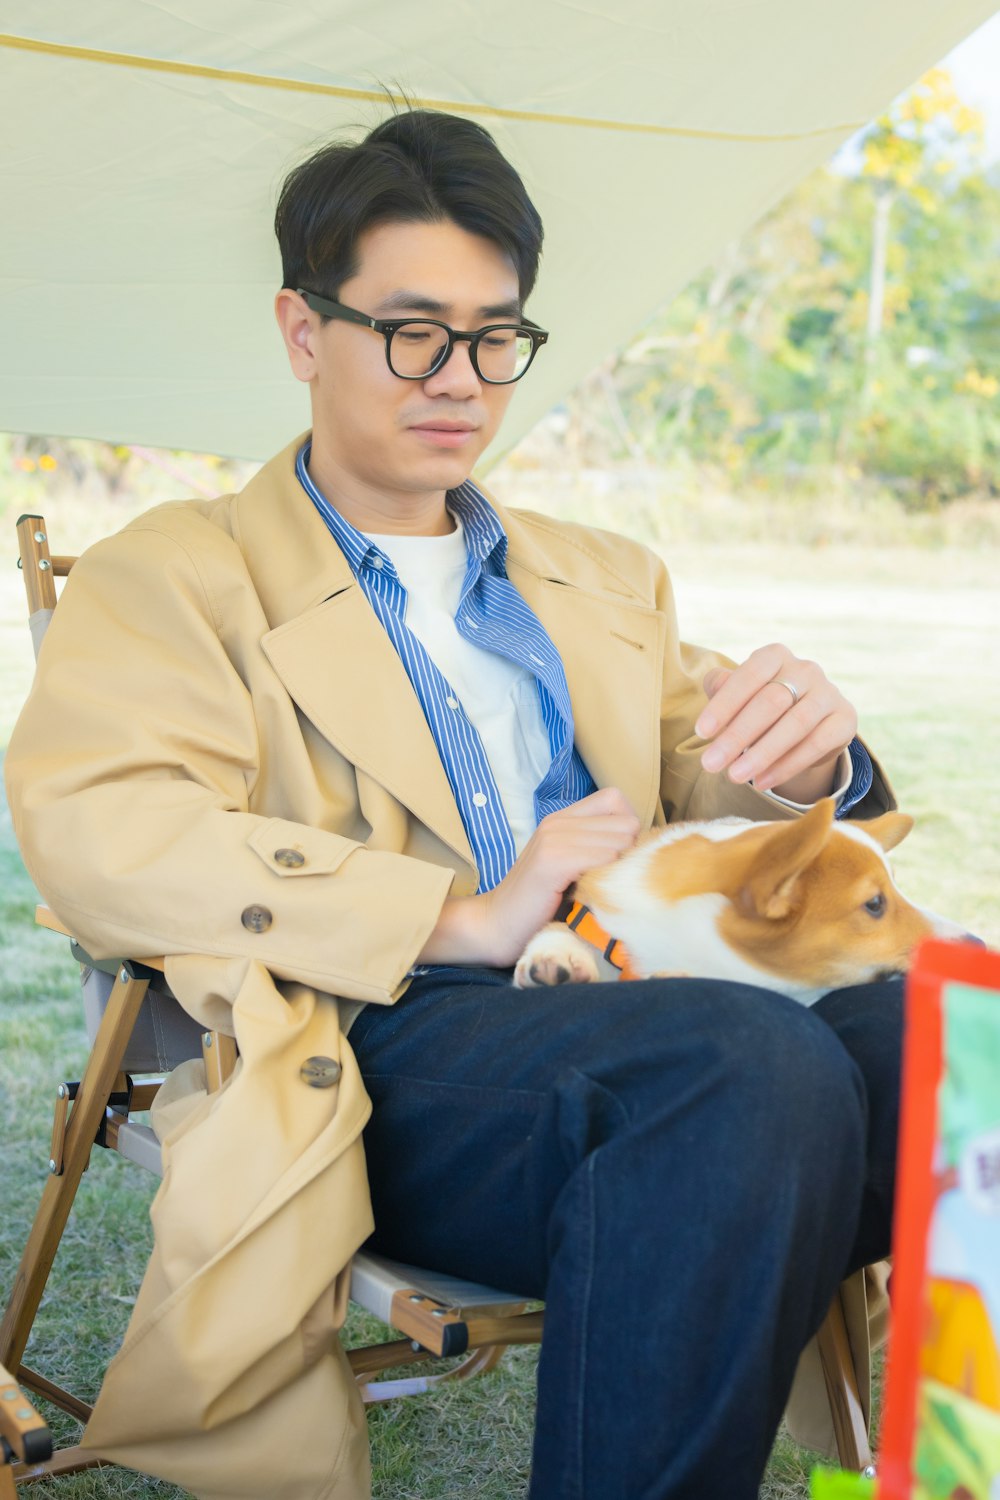 a man sitting in a chair holding a small dog